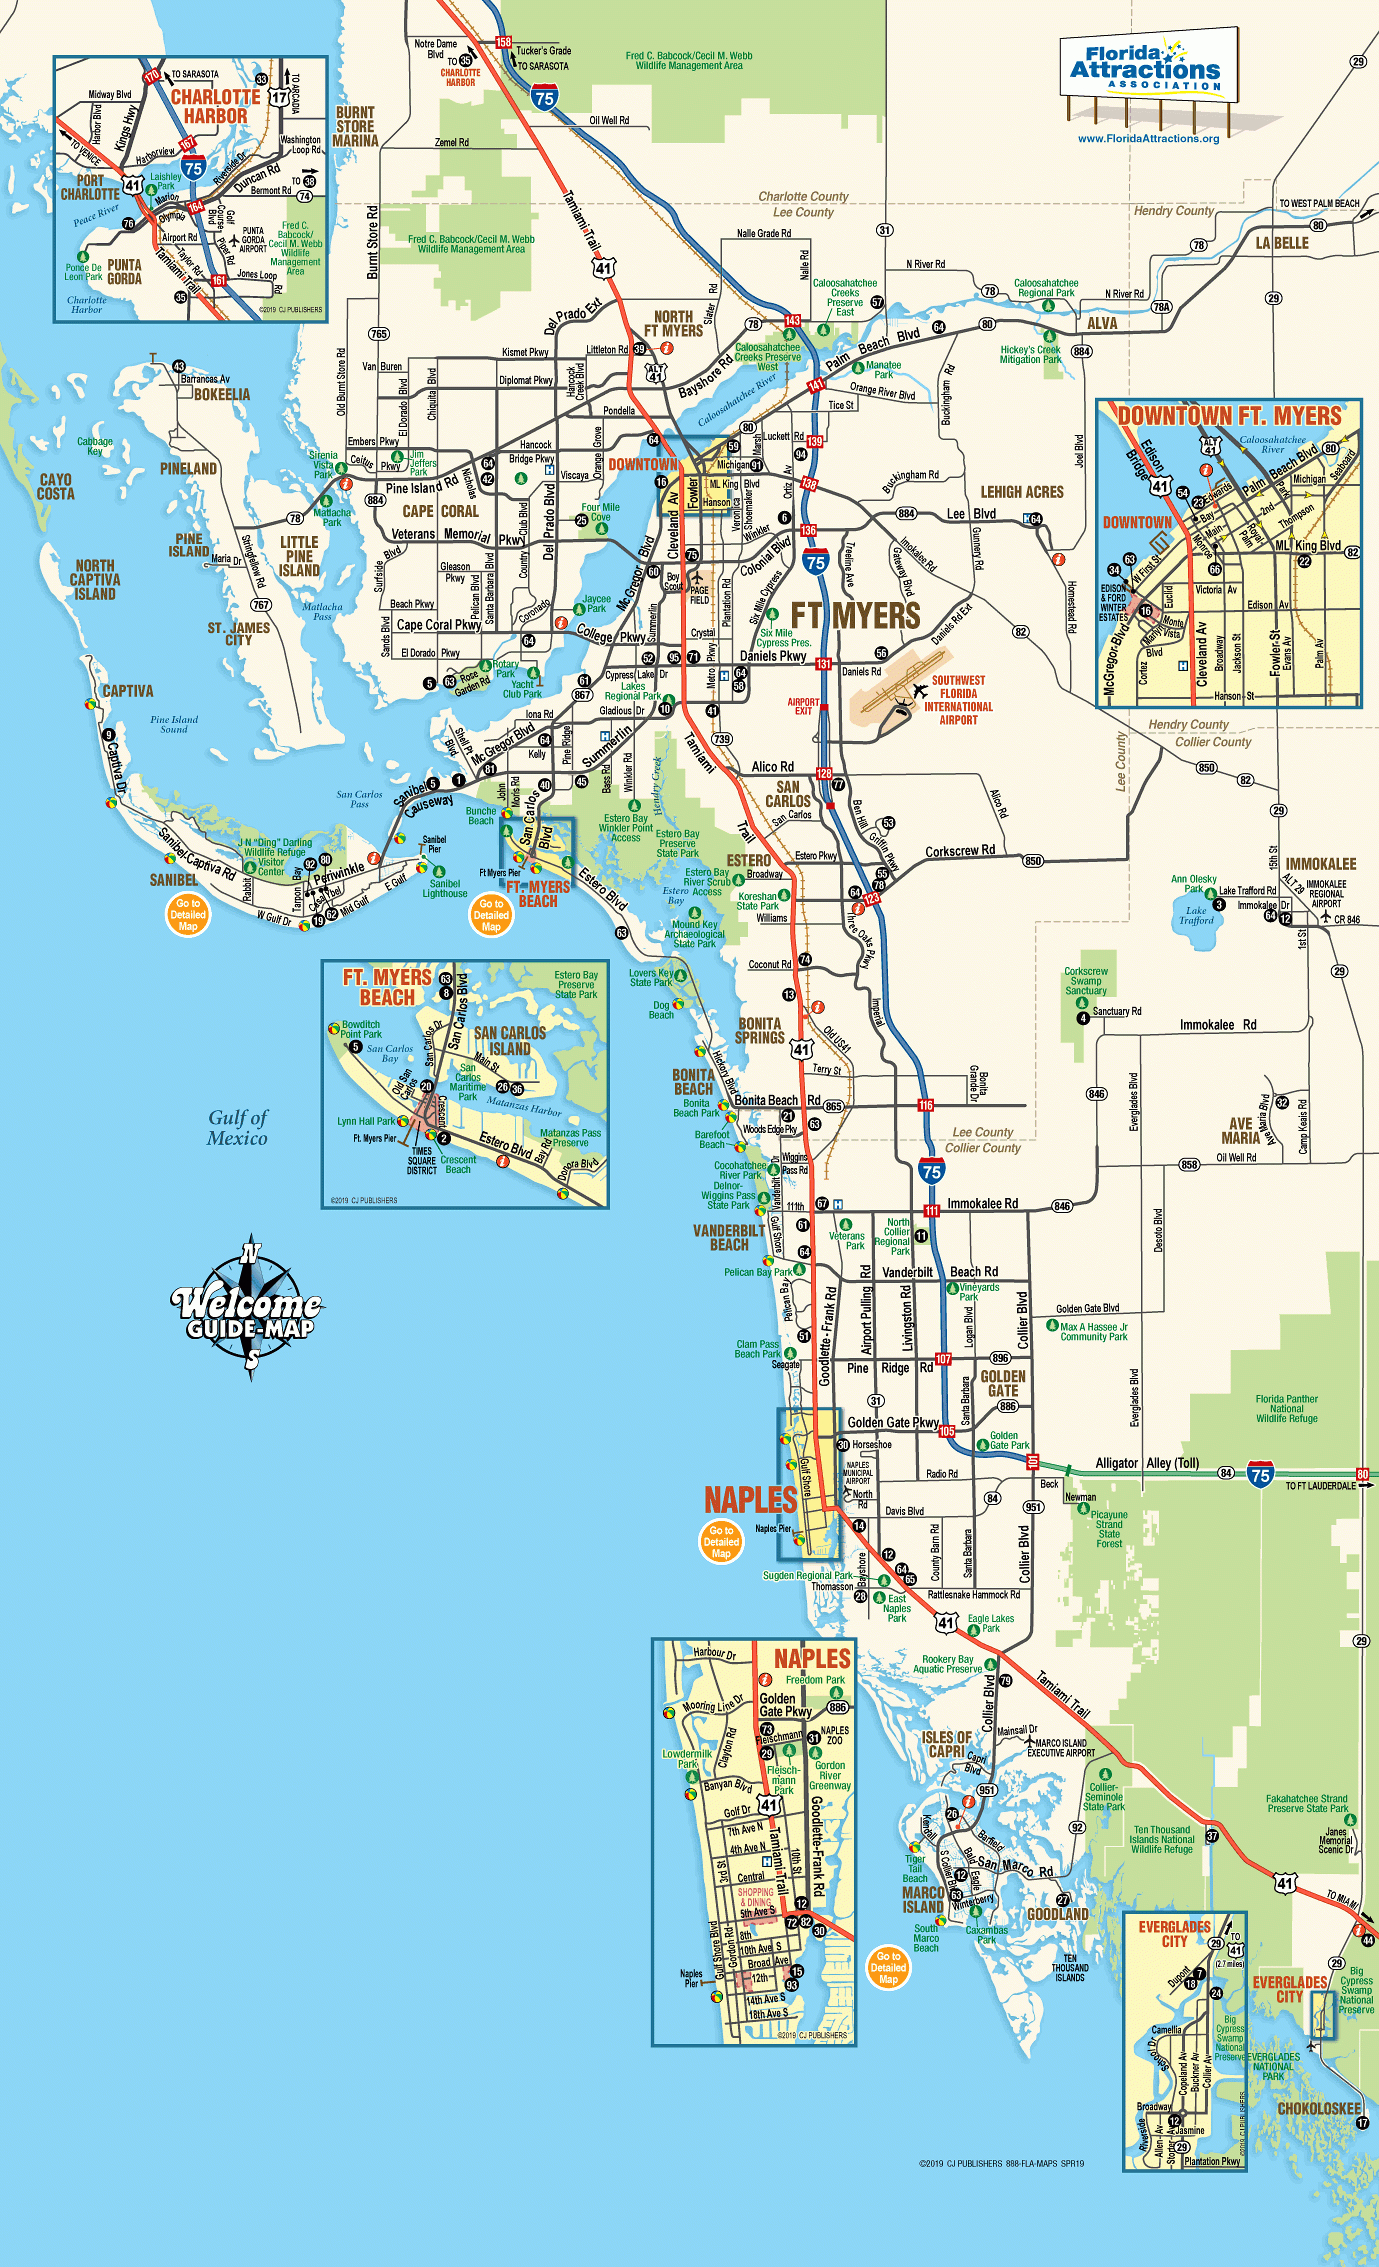 Map Of Southwest Florida - Welcome Guide-Map To Fort Myers &amp;amp; Naples - Map Of Bonita Springs And Naples Florida